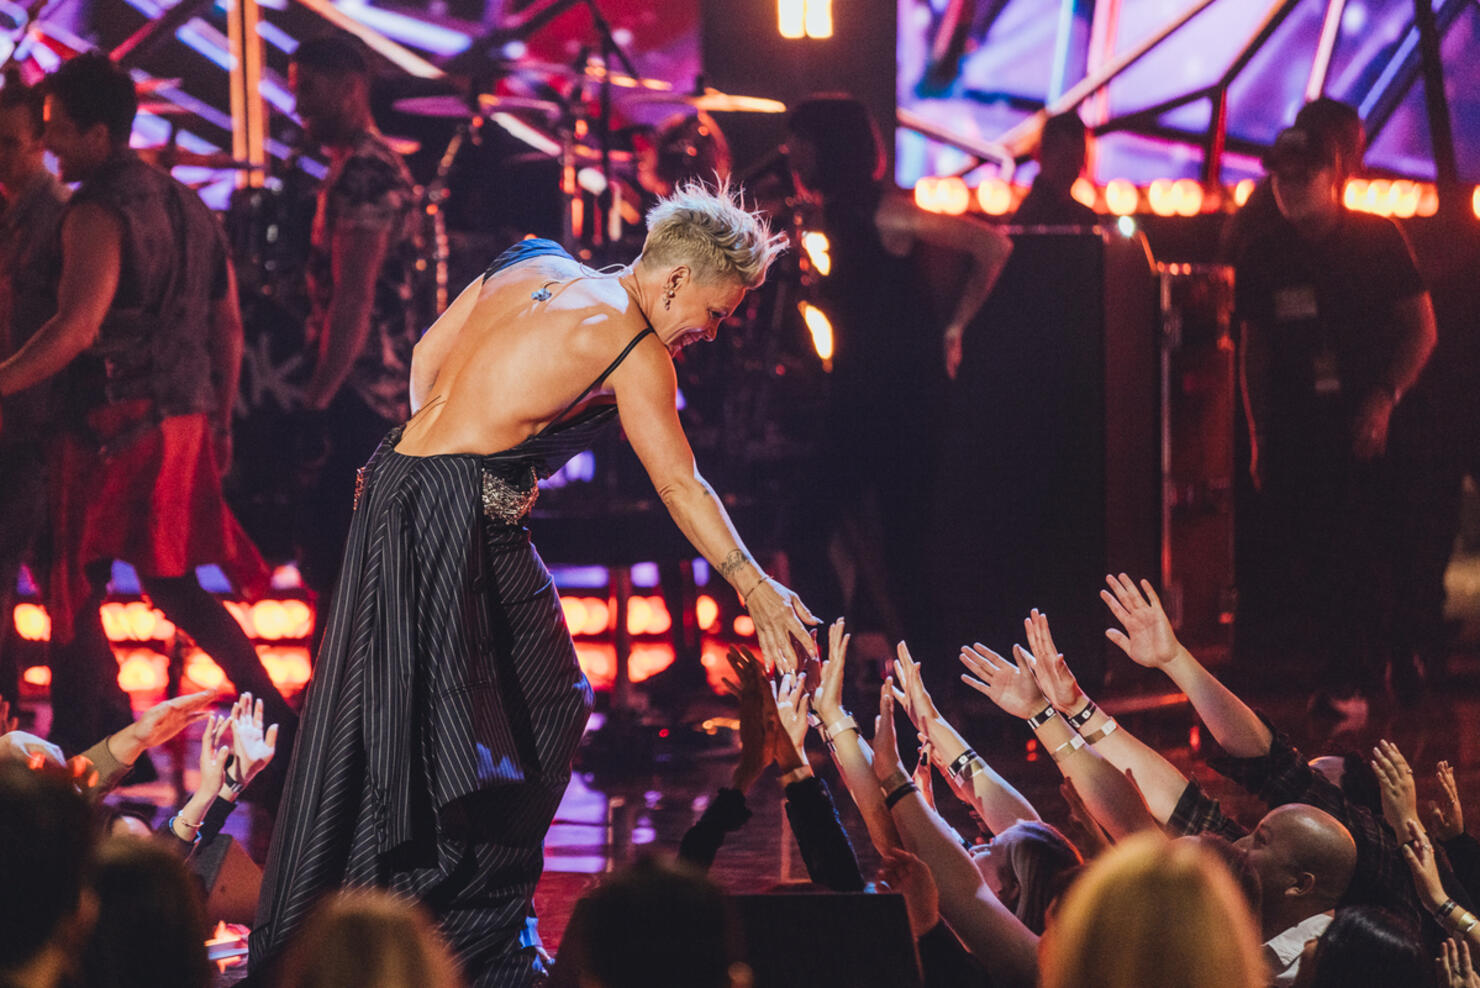 Pink on her longevity and a powerful new album: Trustfall